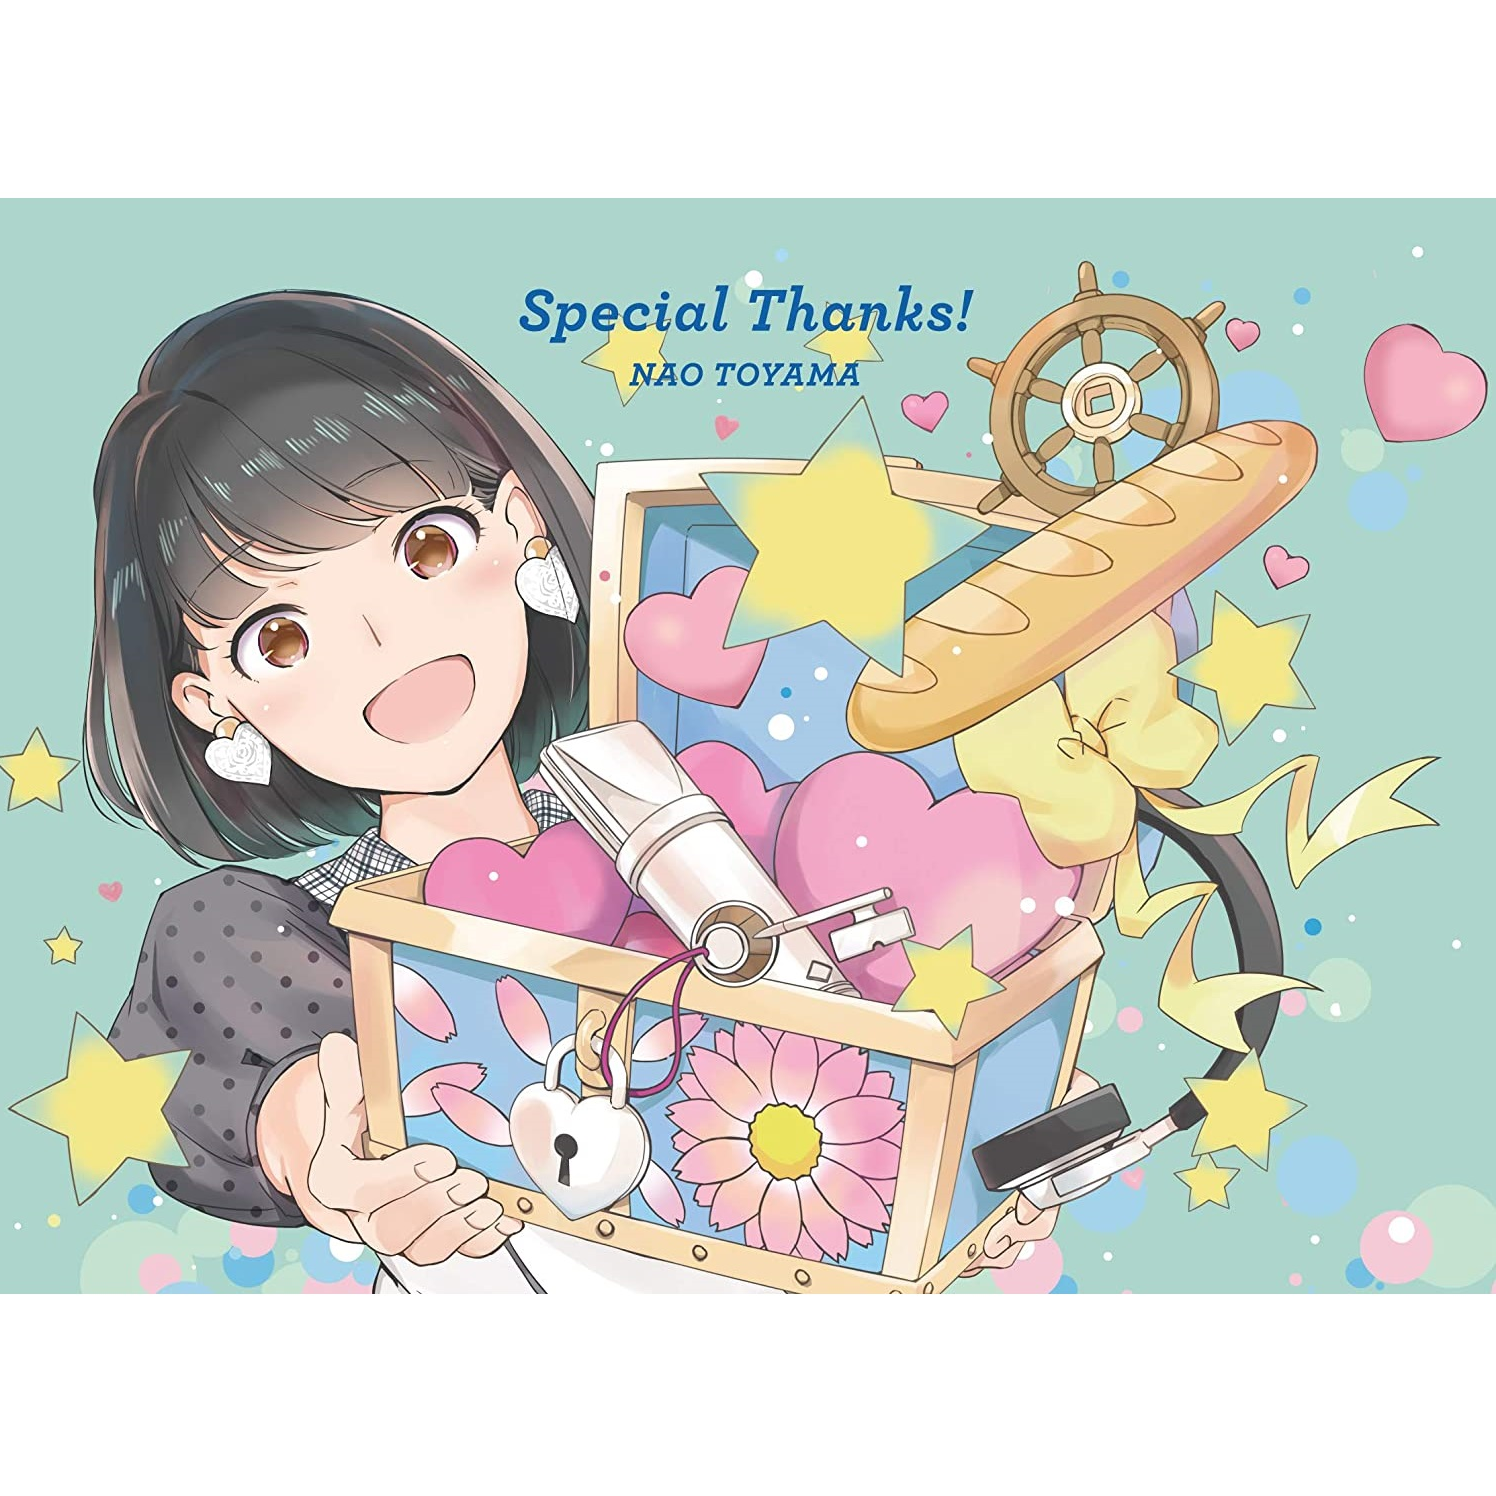 Special Thanks! pan